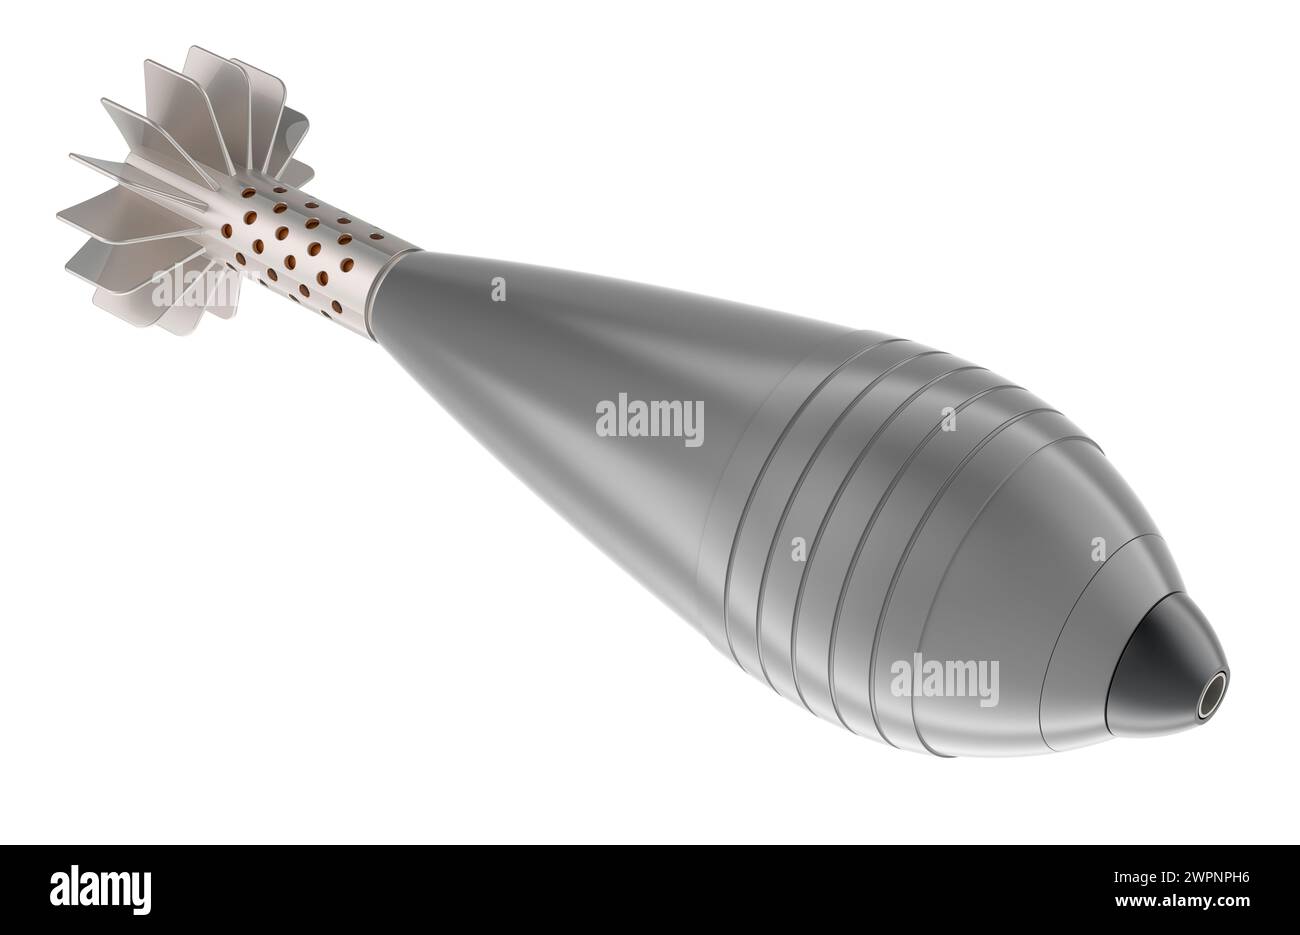 Mortar bomb Cut Out Stock Images & Pictures - Alamy